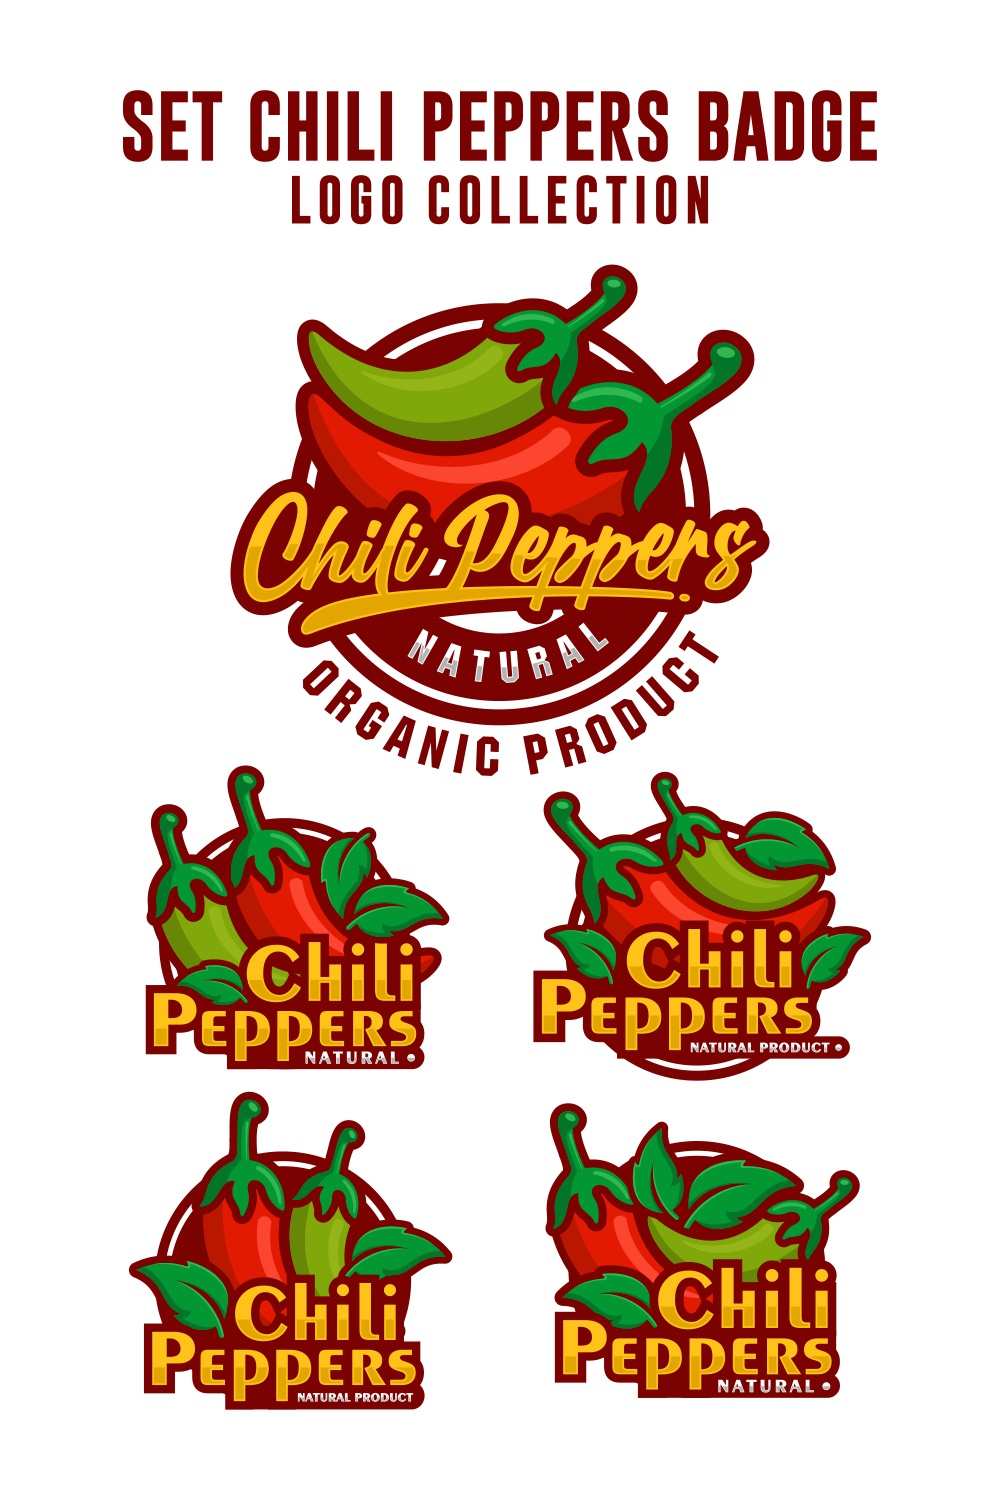 Set Chili pepper badge logo design collection - $6 pinterest preview image.